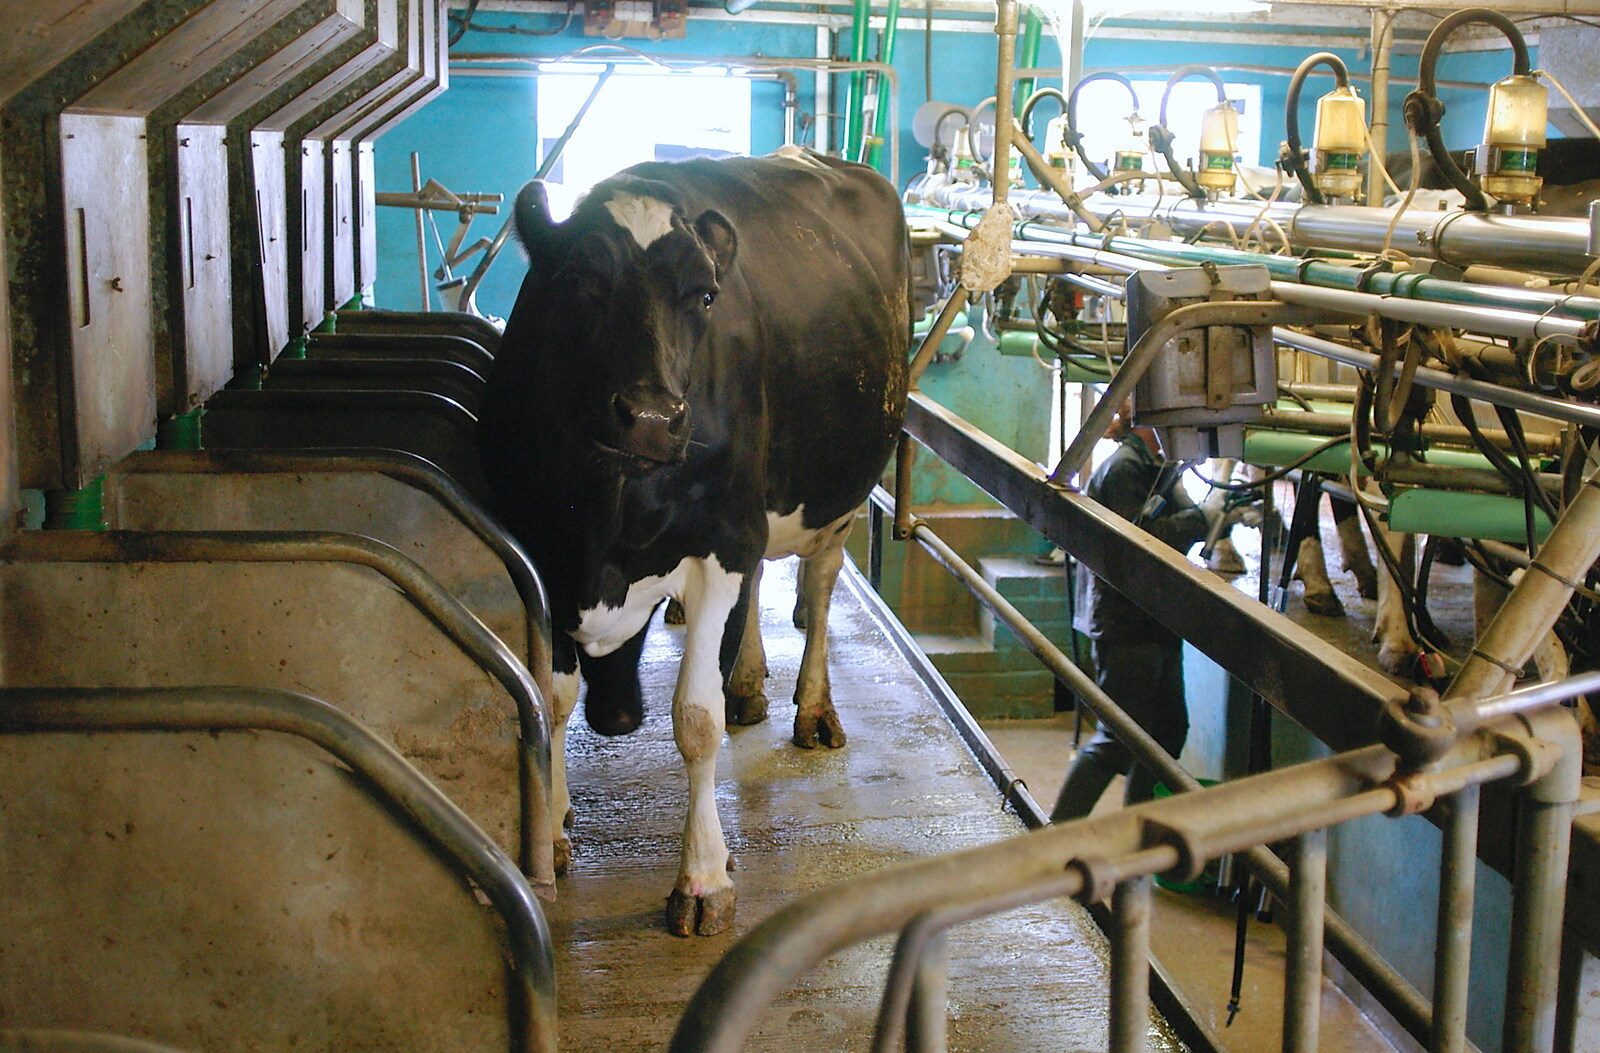 The next cow wanders in from Wavy and the Milking Room, Dairy Farm, Thrandeston, Suffolk - 28th March 2005